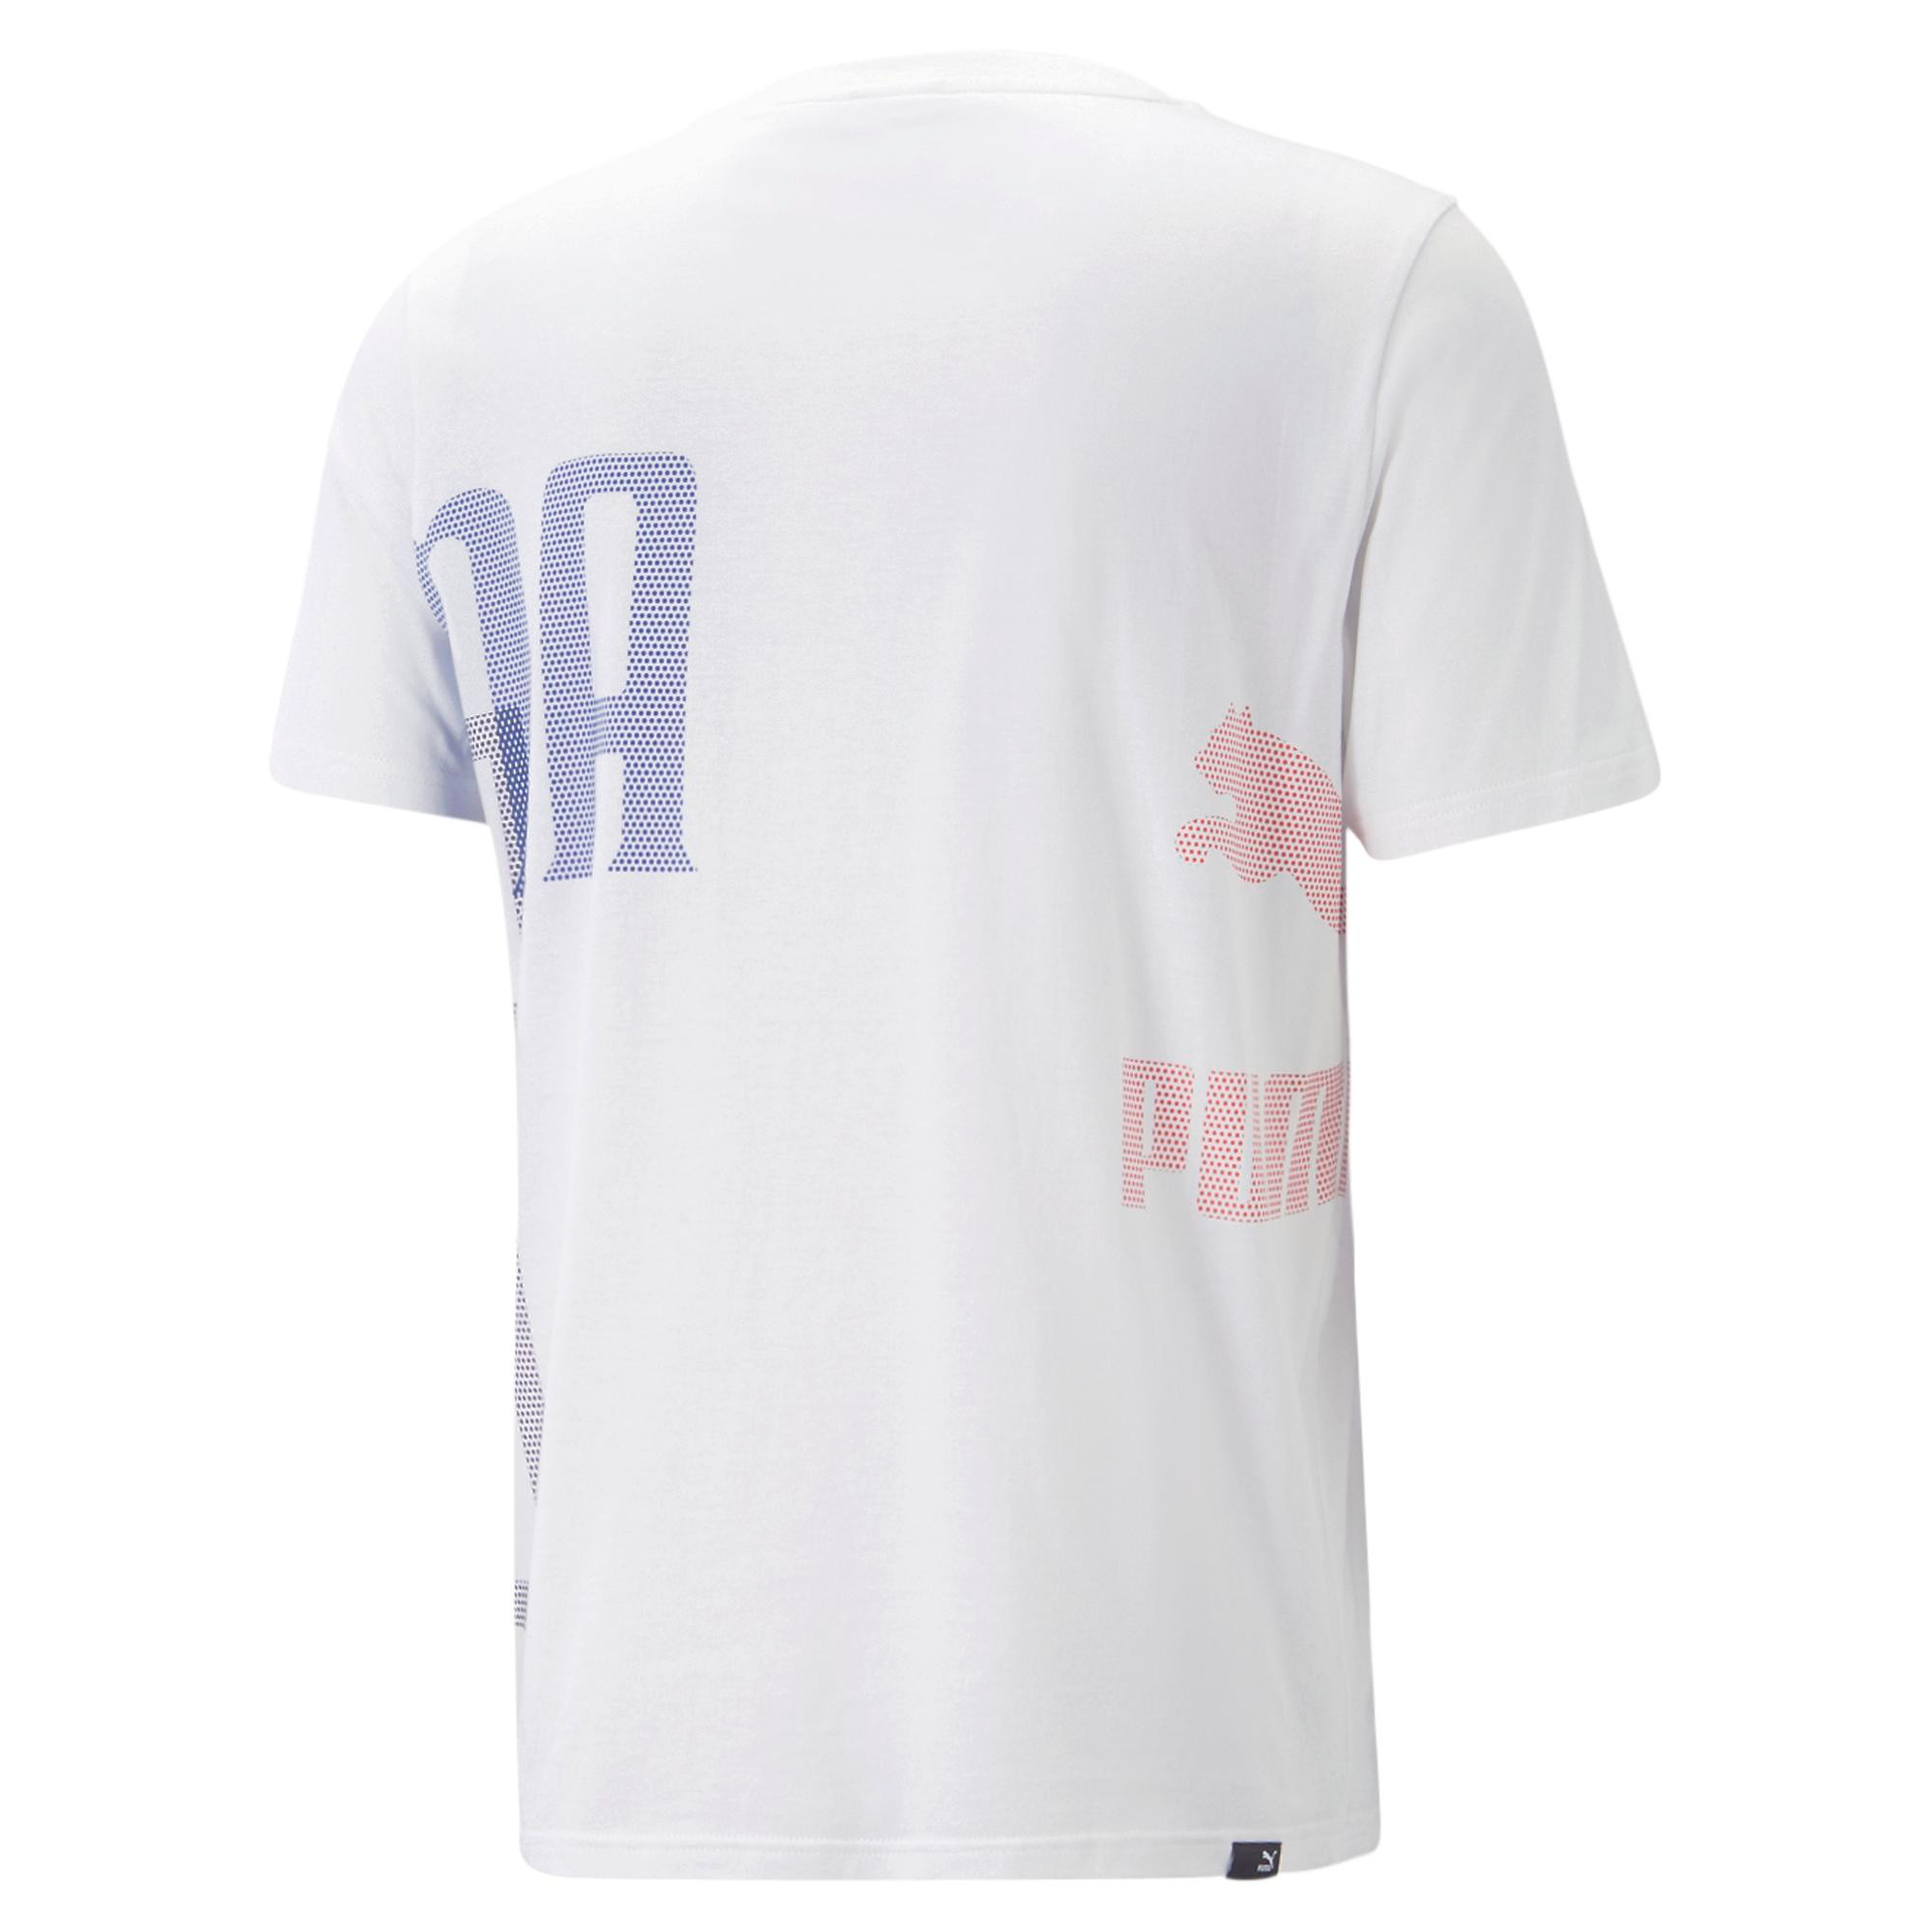 Puma - T-shirt in cotone con logo, Bianco, large image number 1